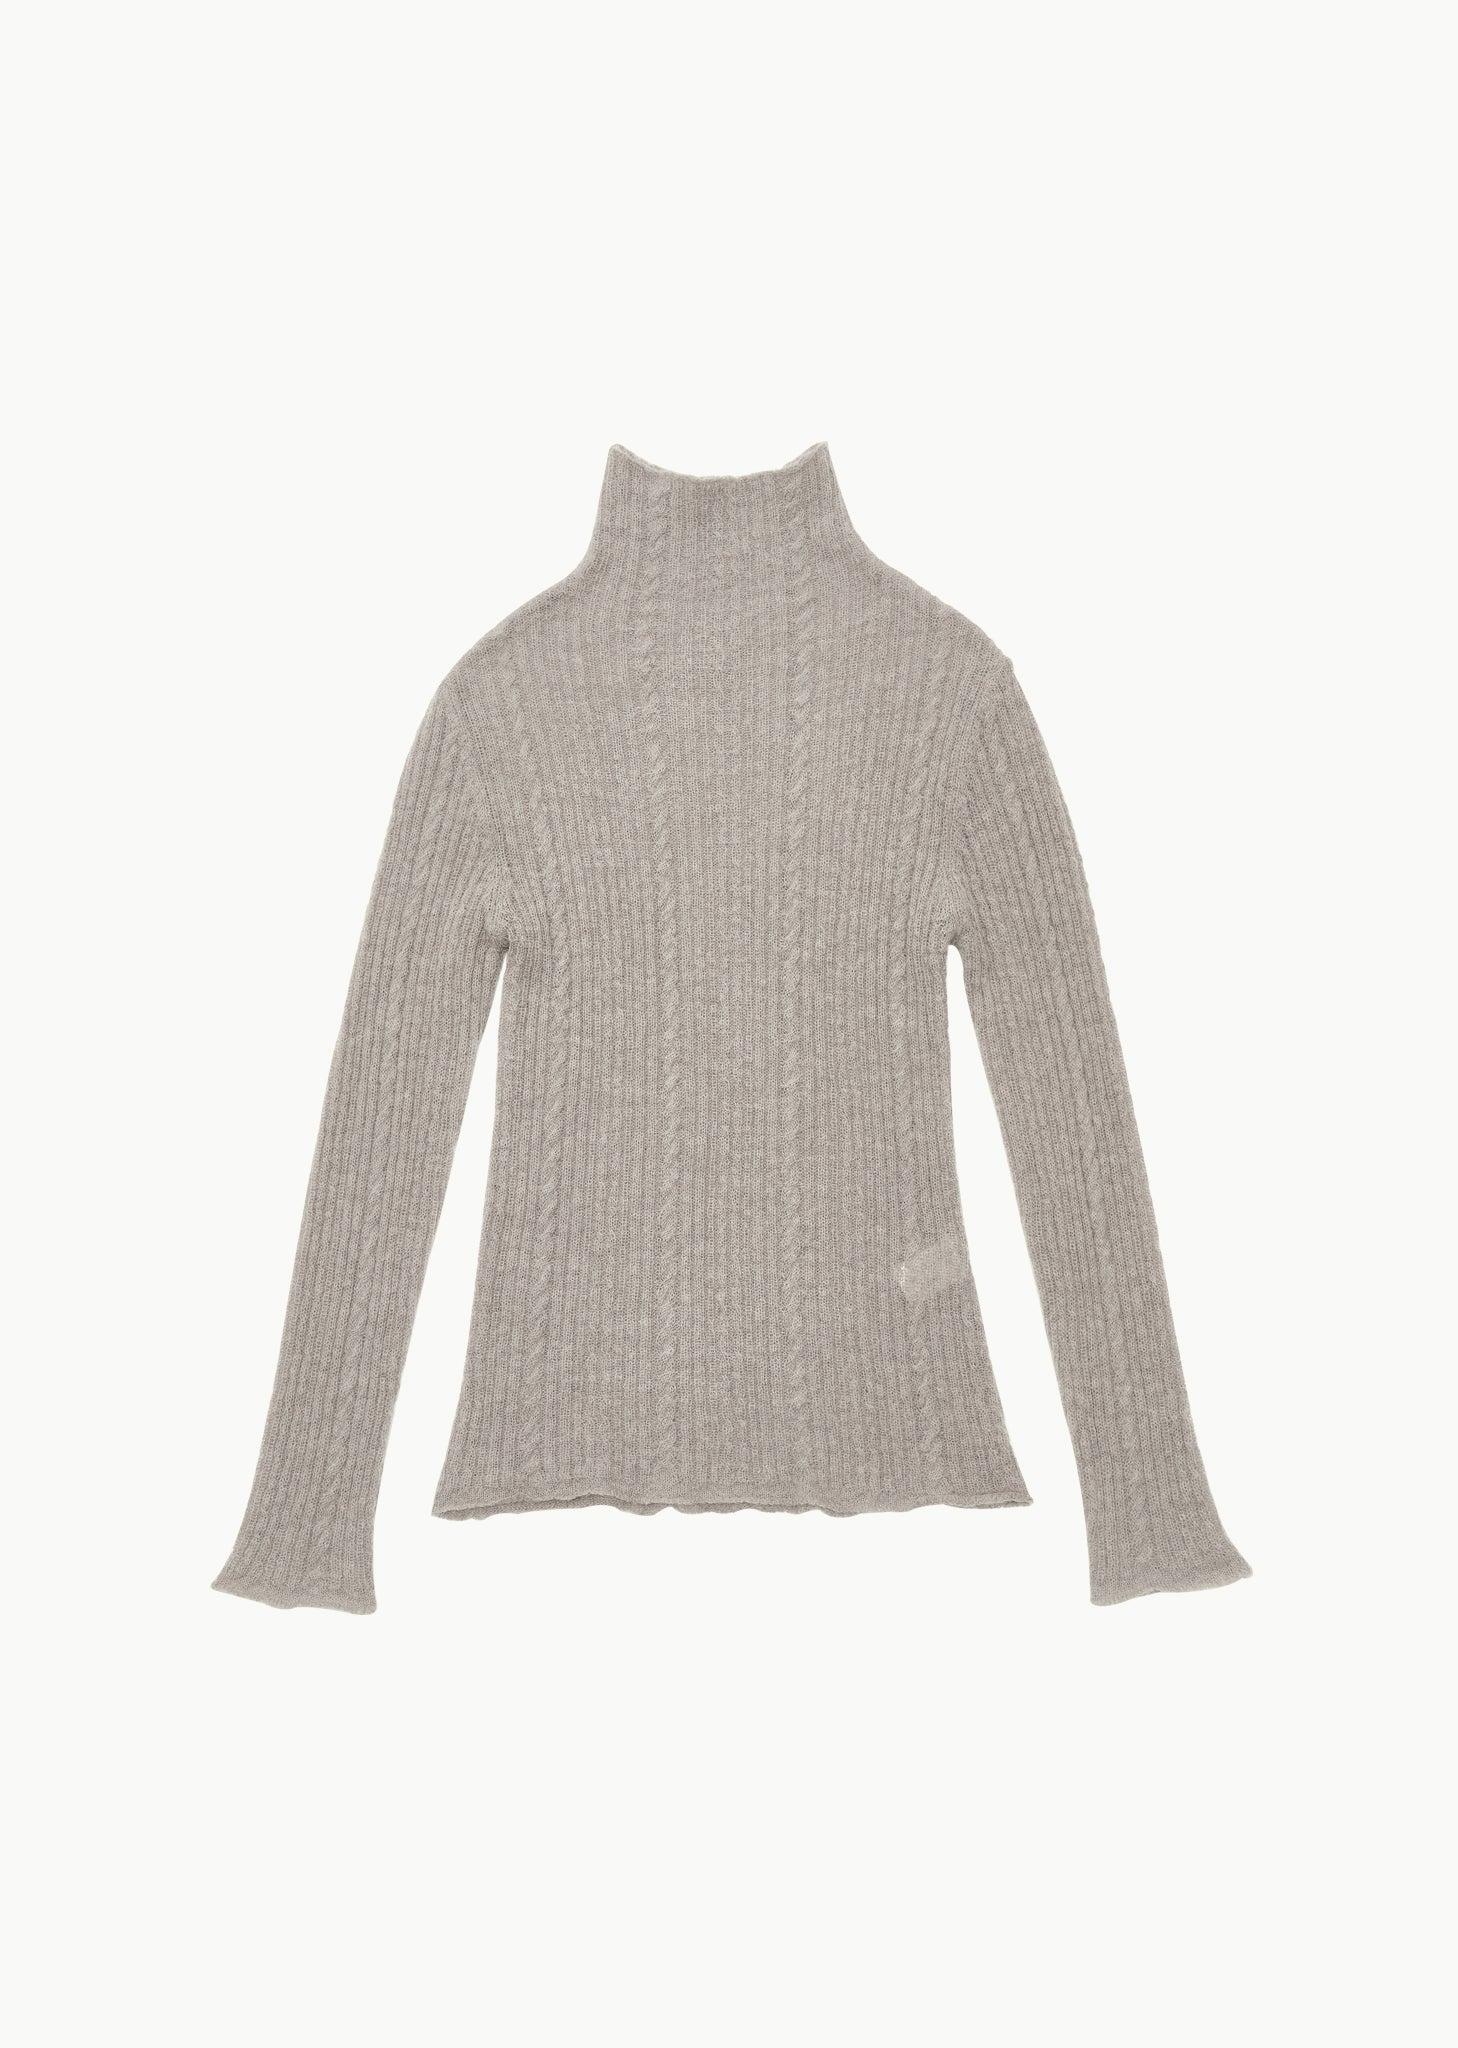 SHEER TURTLE NECK PULLOVER (2 COLORS)